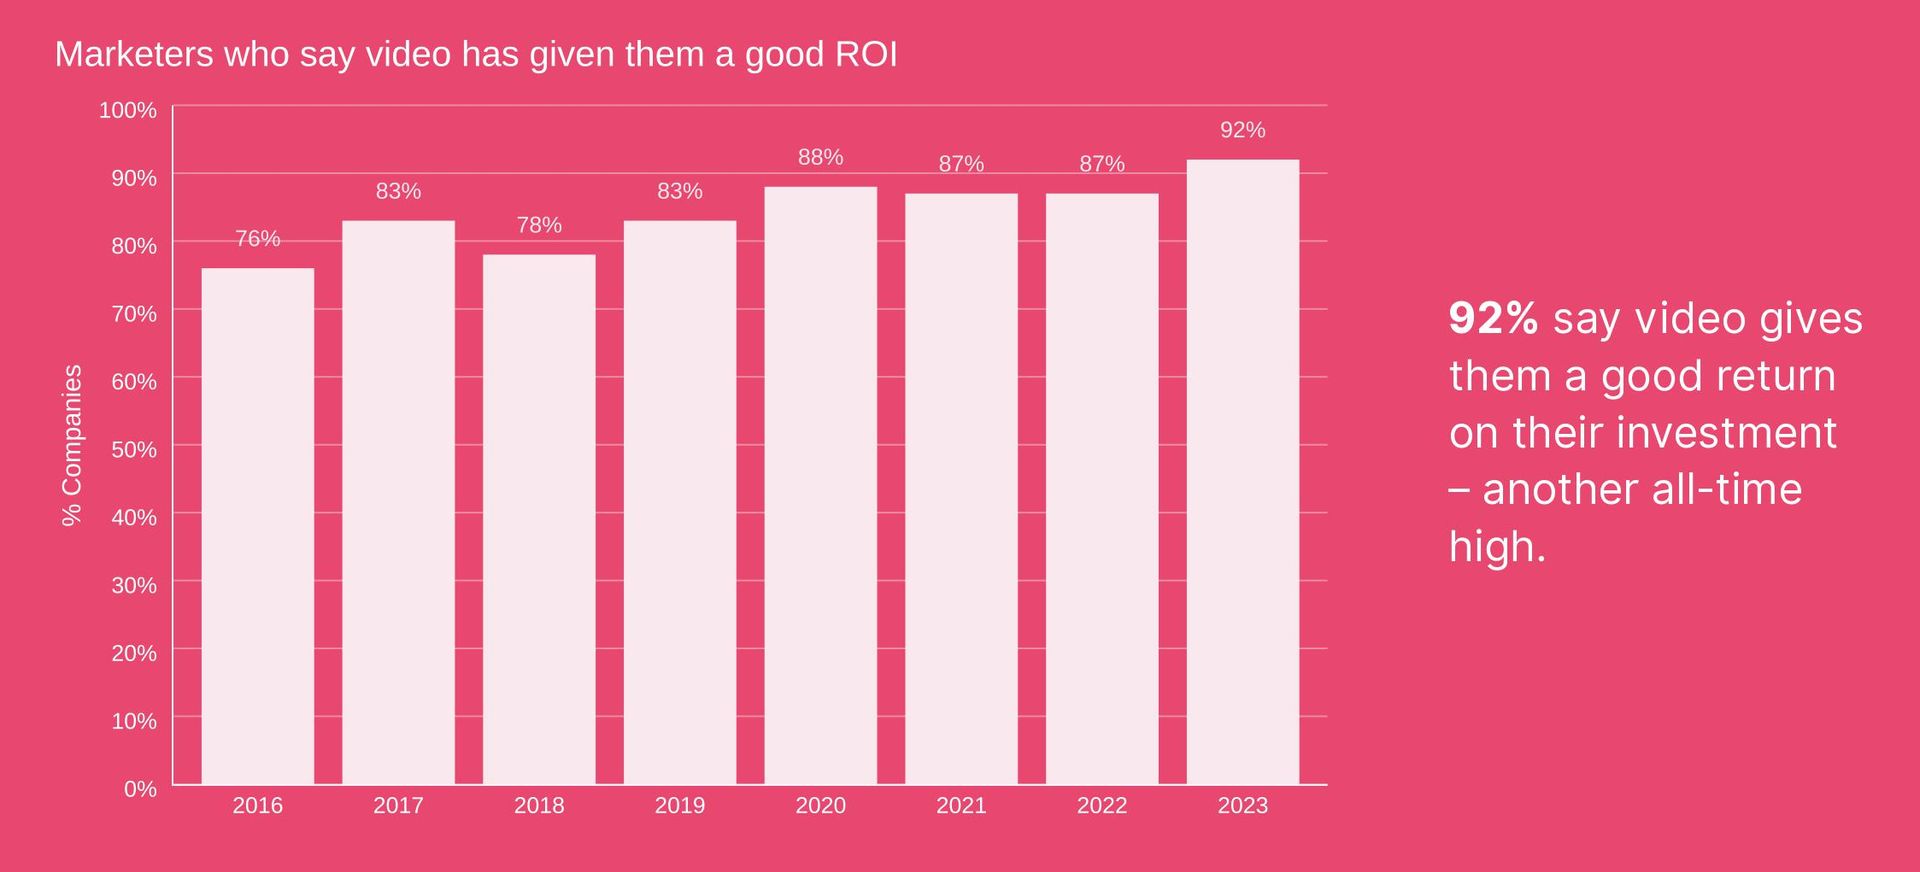 A graph showing the percentage of marketers who say video marketing offers good ROI, from 2016-2023